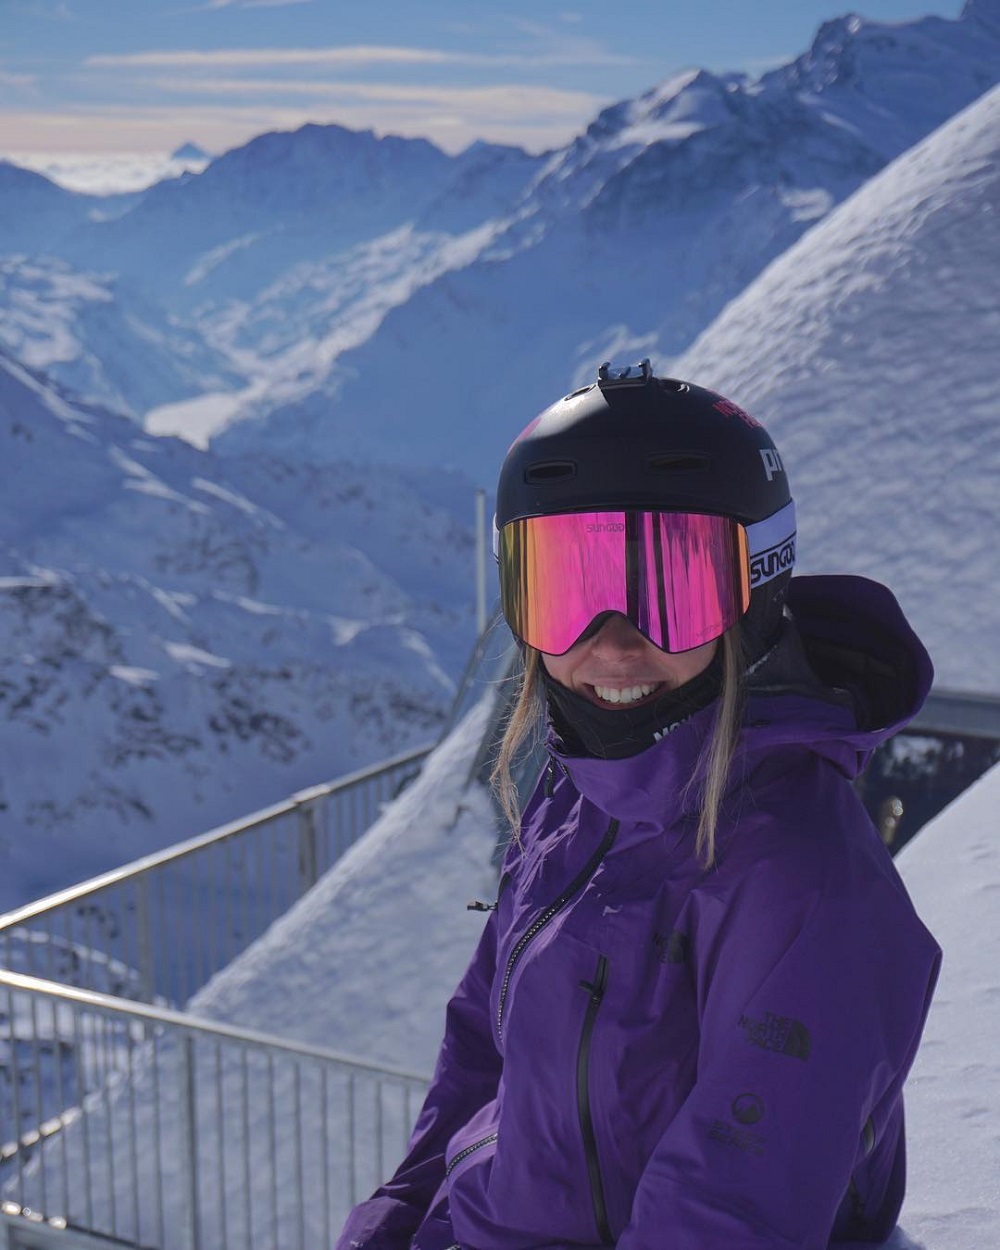 "I discovered Verbier about 8 years ago. I have never been bored here, not even once."